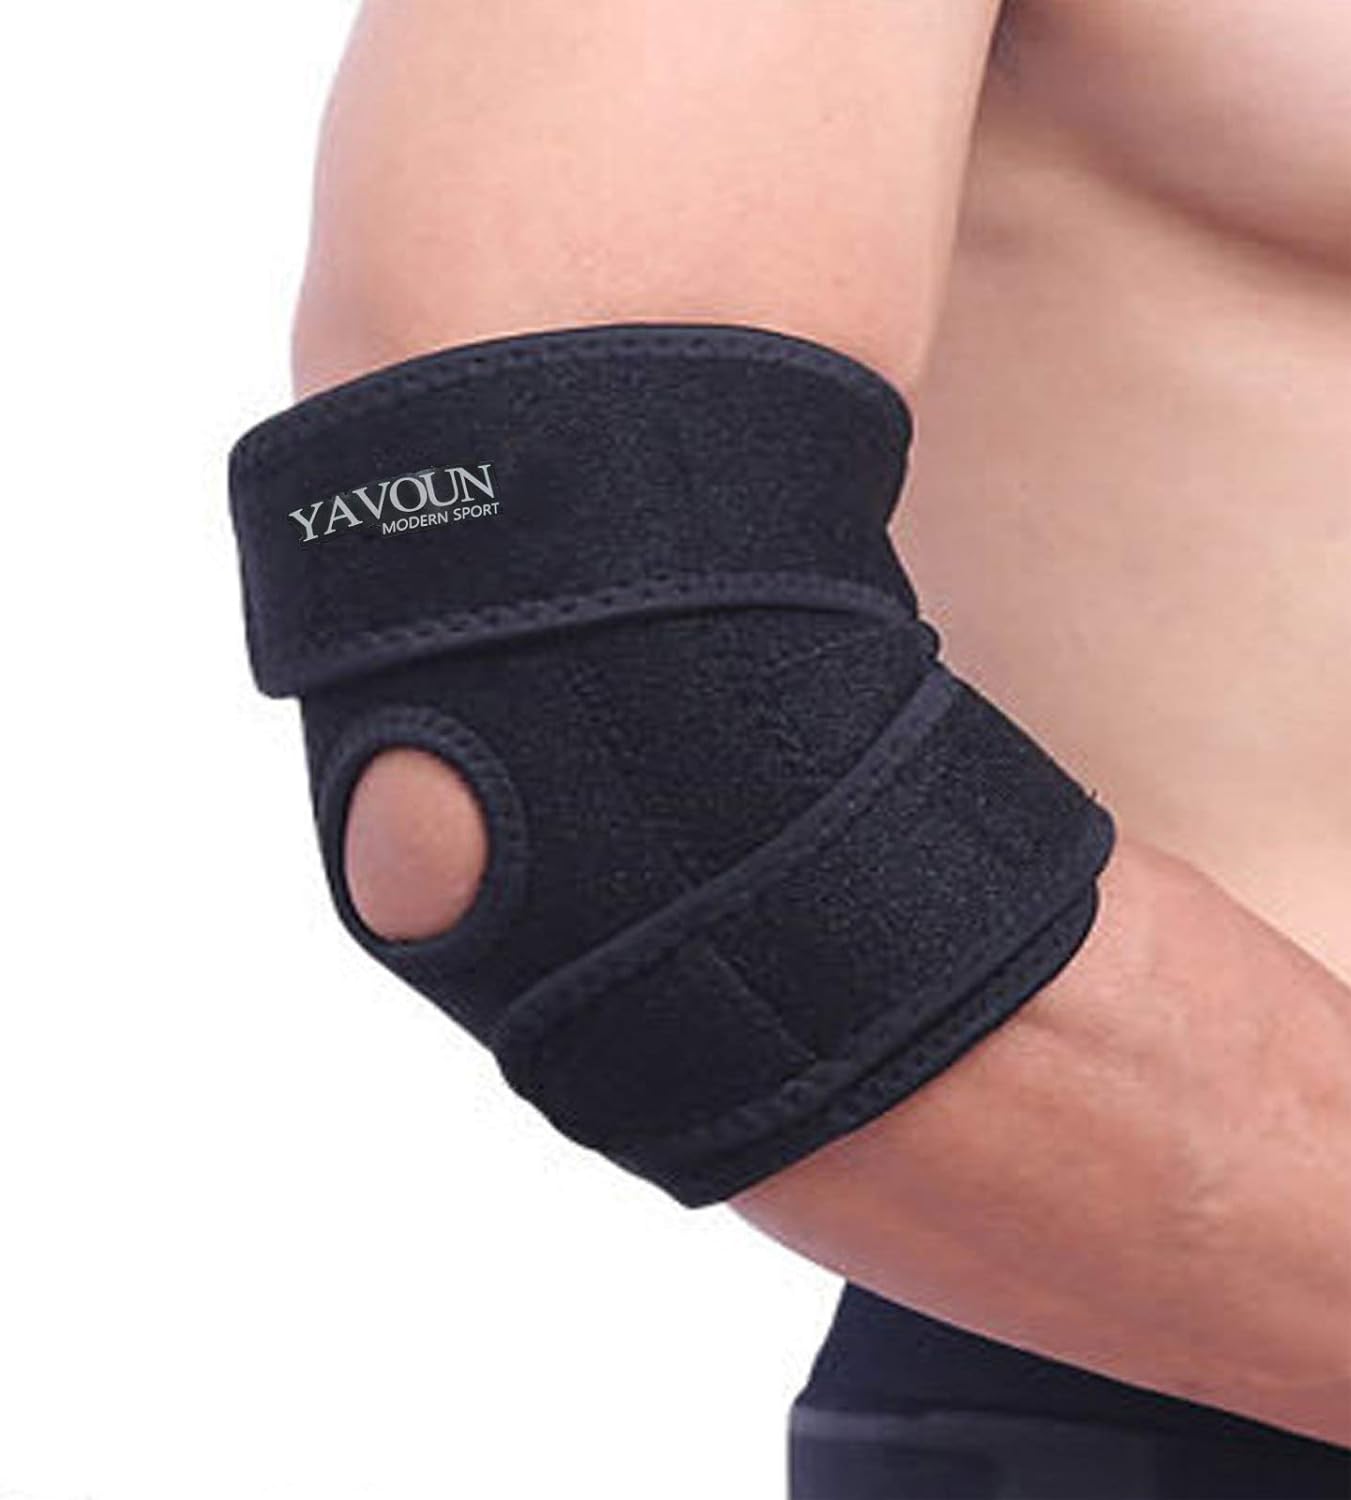 YAVOUN Elbow Brace, Adjustable Tennis Elbow Support Brace, Great For Sprained Elbows, Tendonitis, Arthritis, basketball, Baseball, Golfers Elbow Provides Support  Ease Pains (Black)